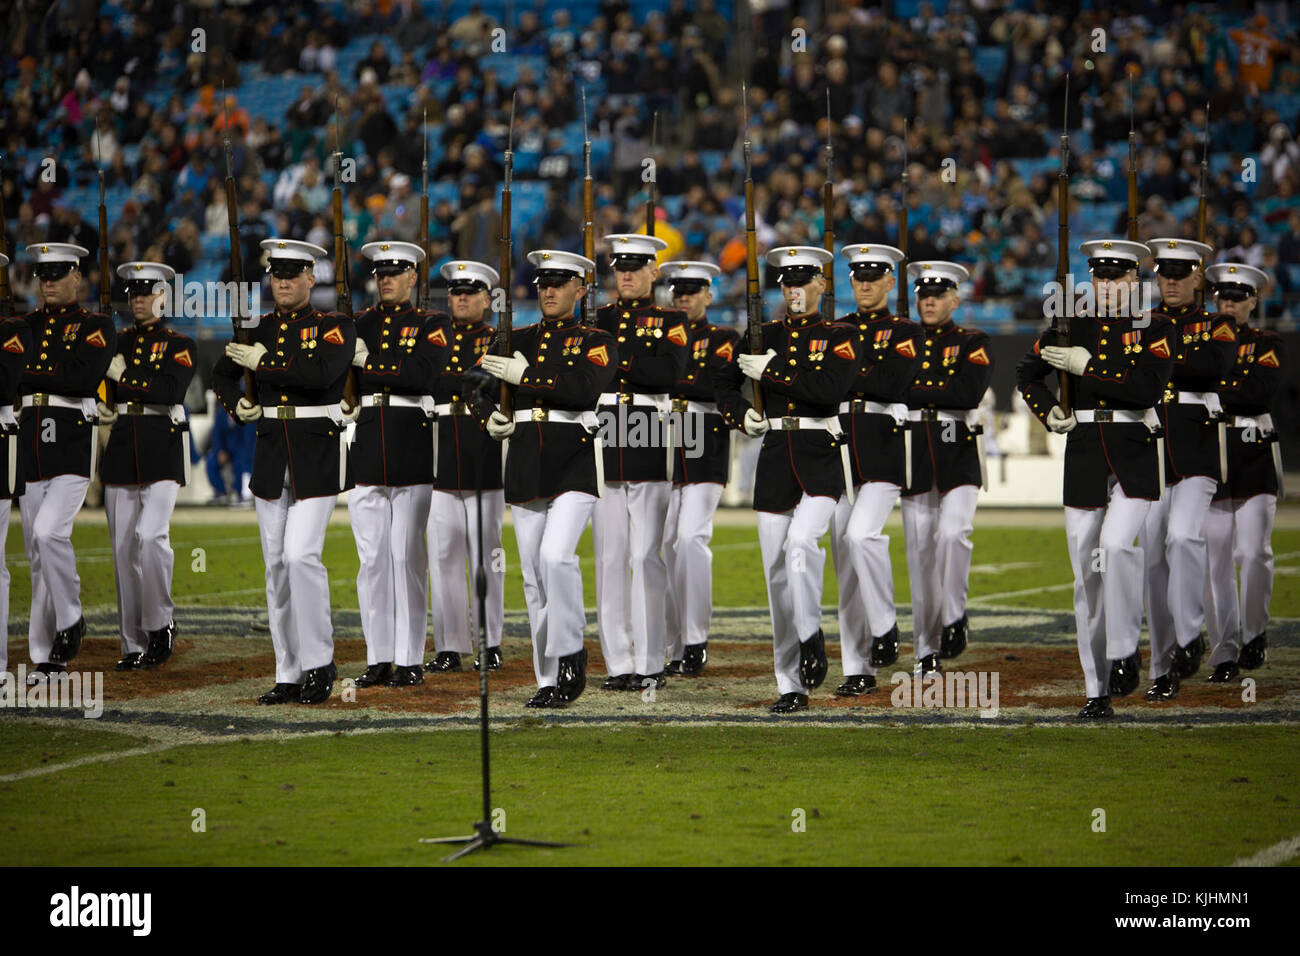 The U.S. Marine Corps Silent Drill Platoon performs precision marching and rifle drill movements during a Salute to Service halftime show at a Carolina Panthers vs. Miami Dolphins game at the Bank of America Stadium, Charlotte, N.C., Nov. 13, 2017. Throughout the year, SDP performs at numerous large-scale events across the country and abroad. (Official Marine Corps photo by Cpl. Damon Mclean/Released) Stock Photo